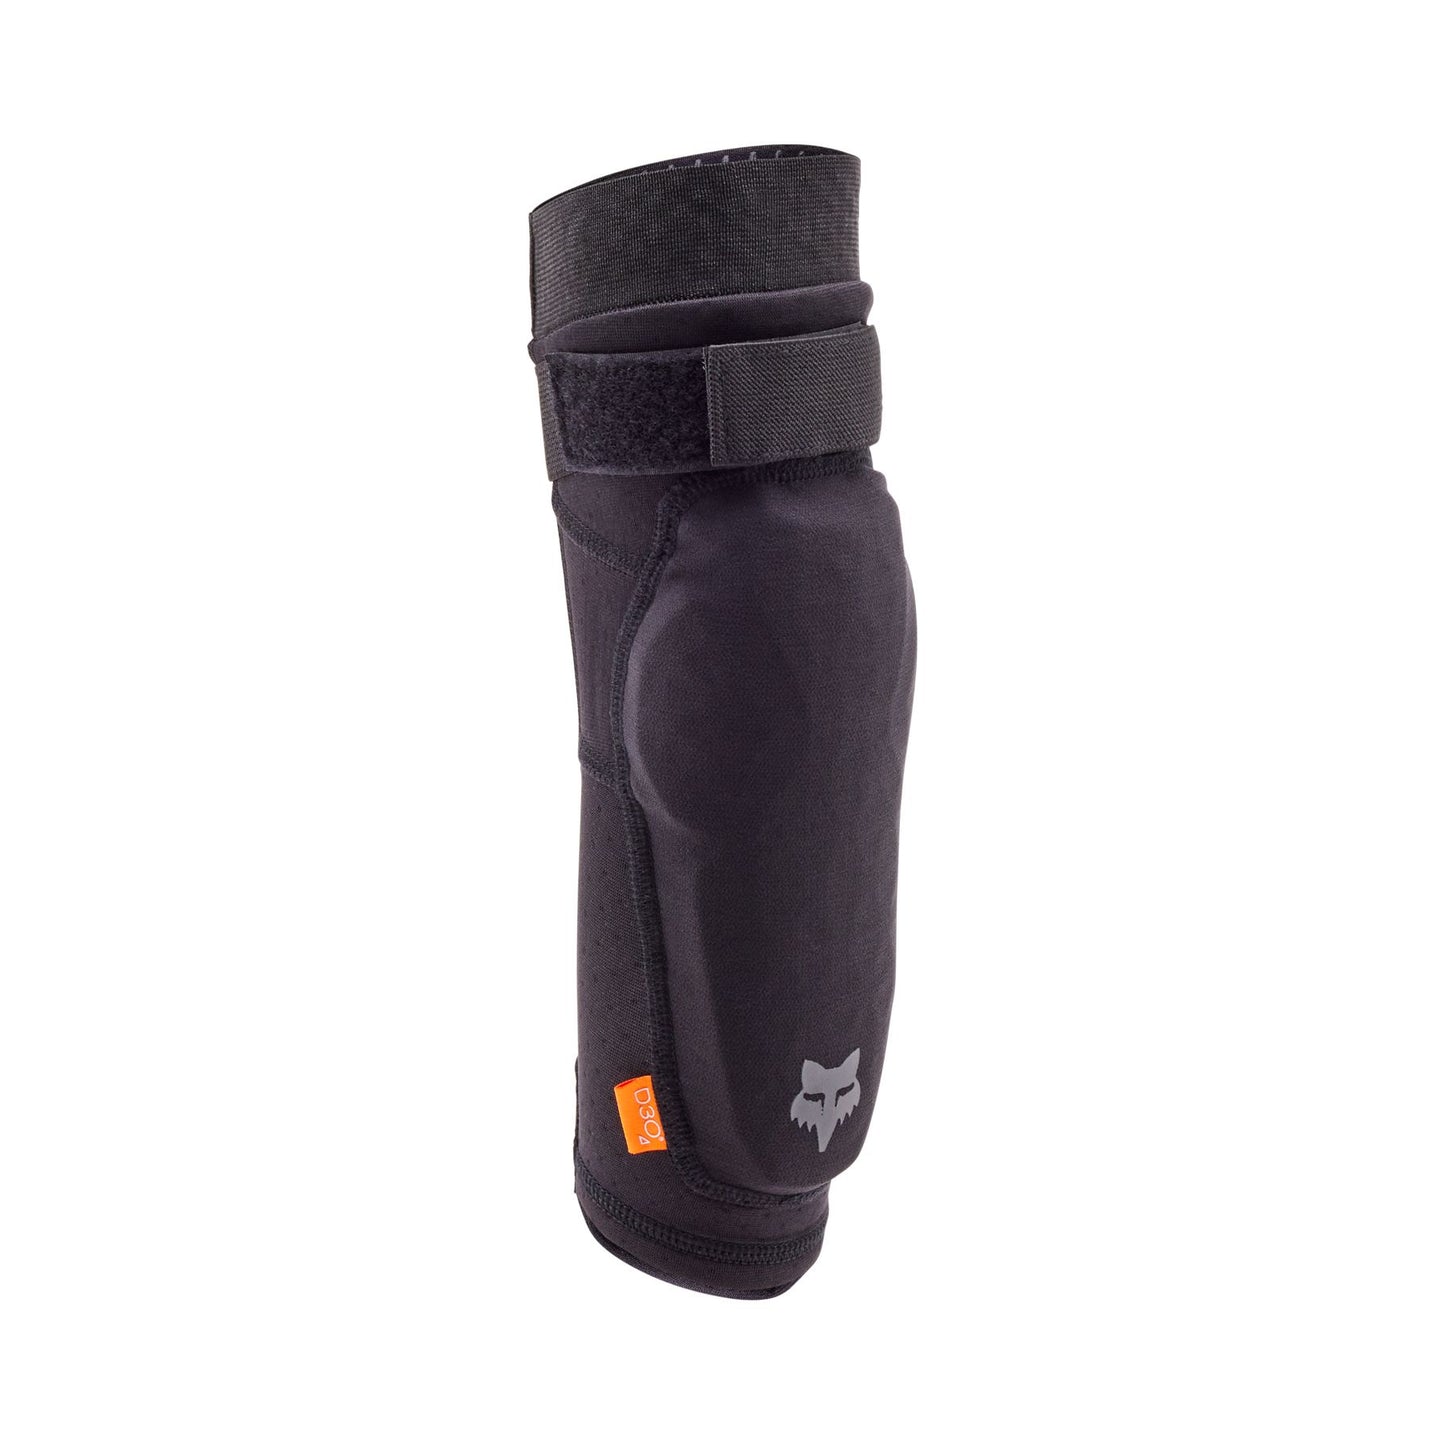 FOX Youth Launch Elbow Guard - Blk